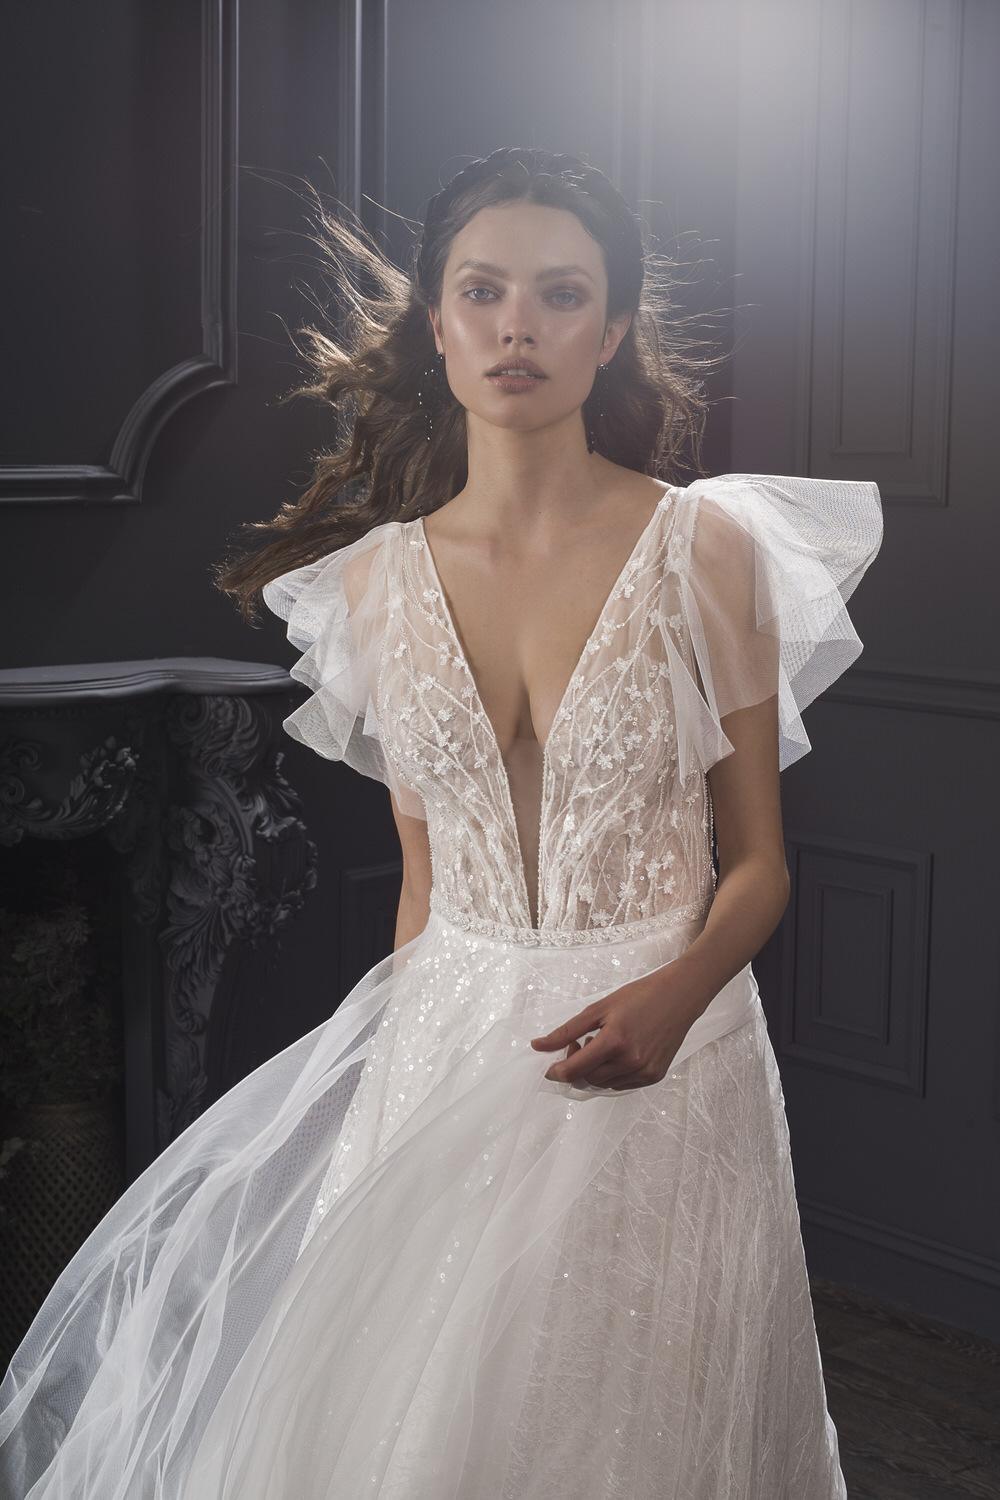 2020 Bridal Collection From The Atelier by Professor Jimmy Choo